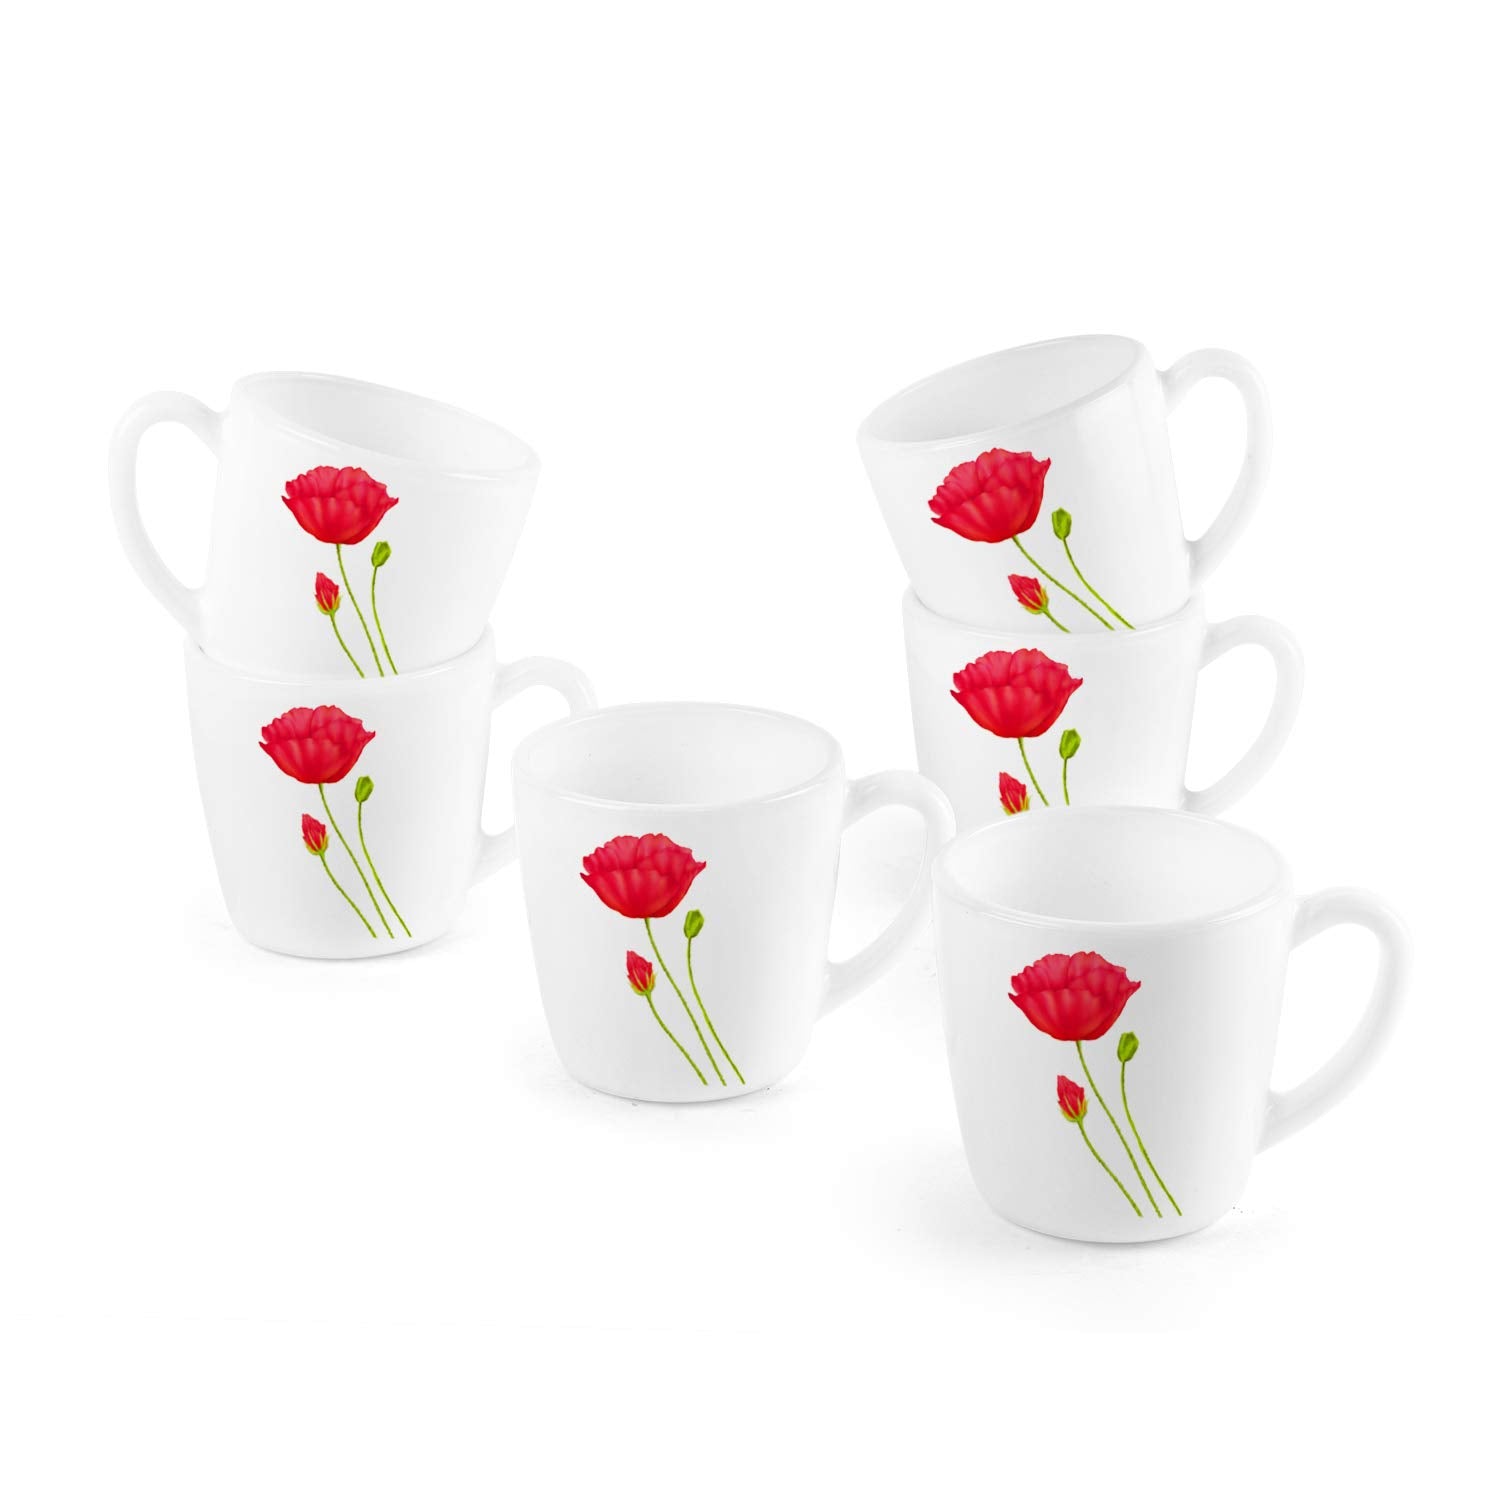 Imperial Red Poppy Ricca Mugs, 6 Pieces / 6 Pieces